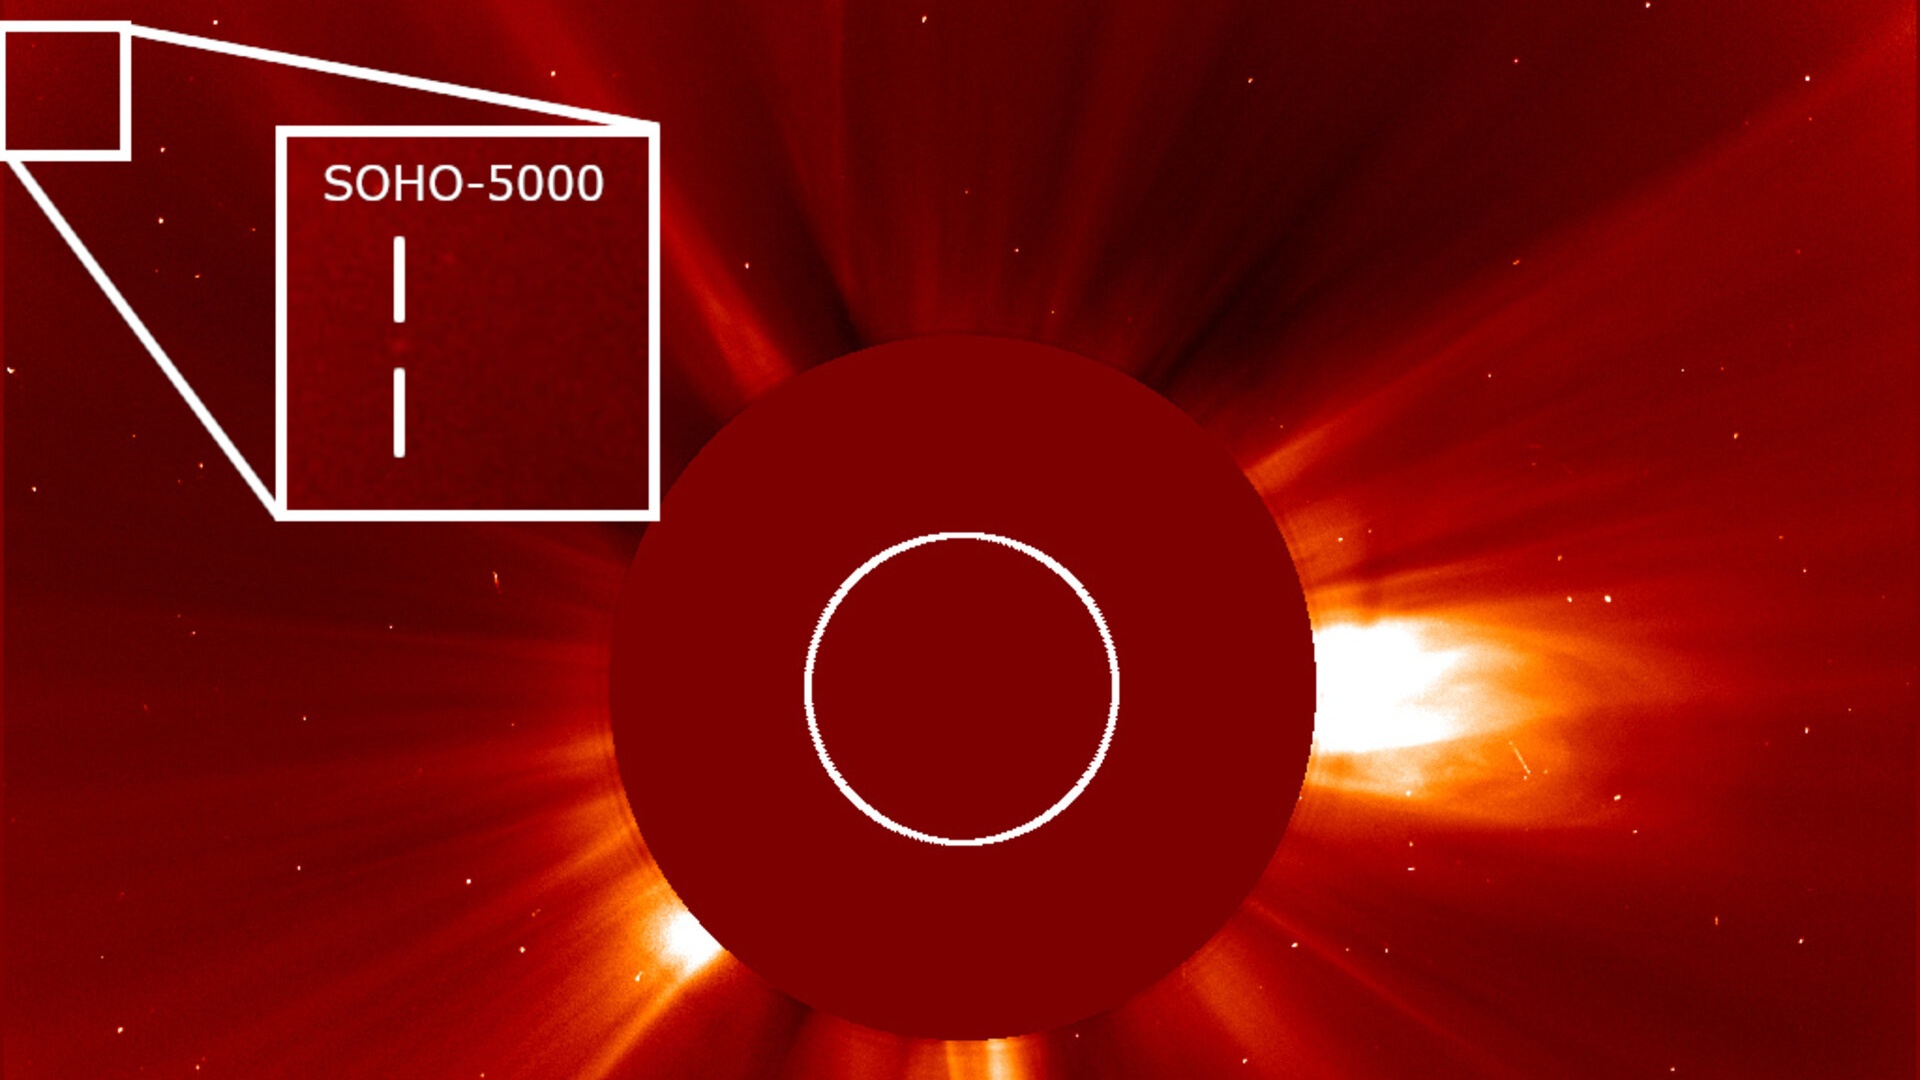 Solar spacecraft ‘SOHO’ discovers its 5,000th comet Space